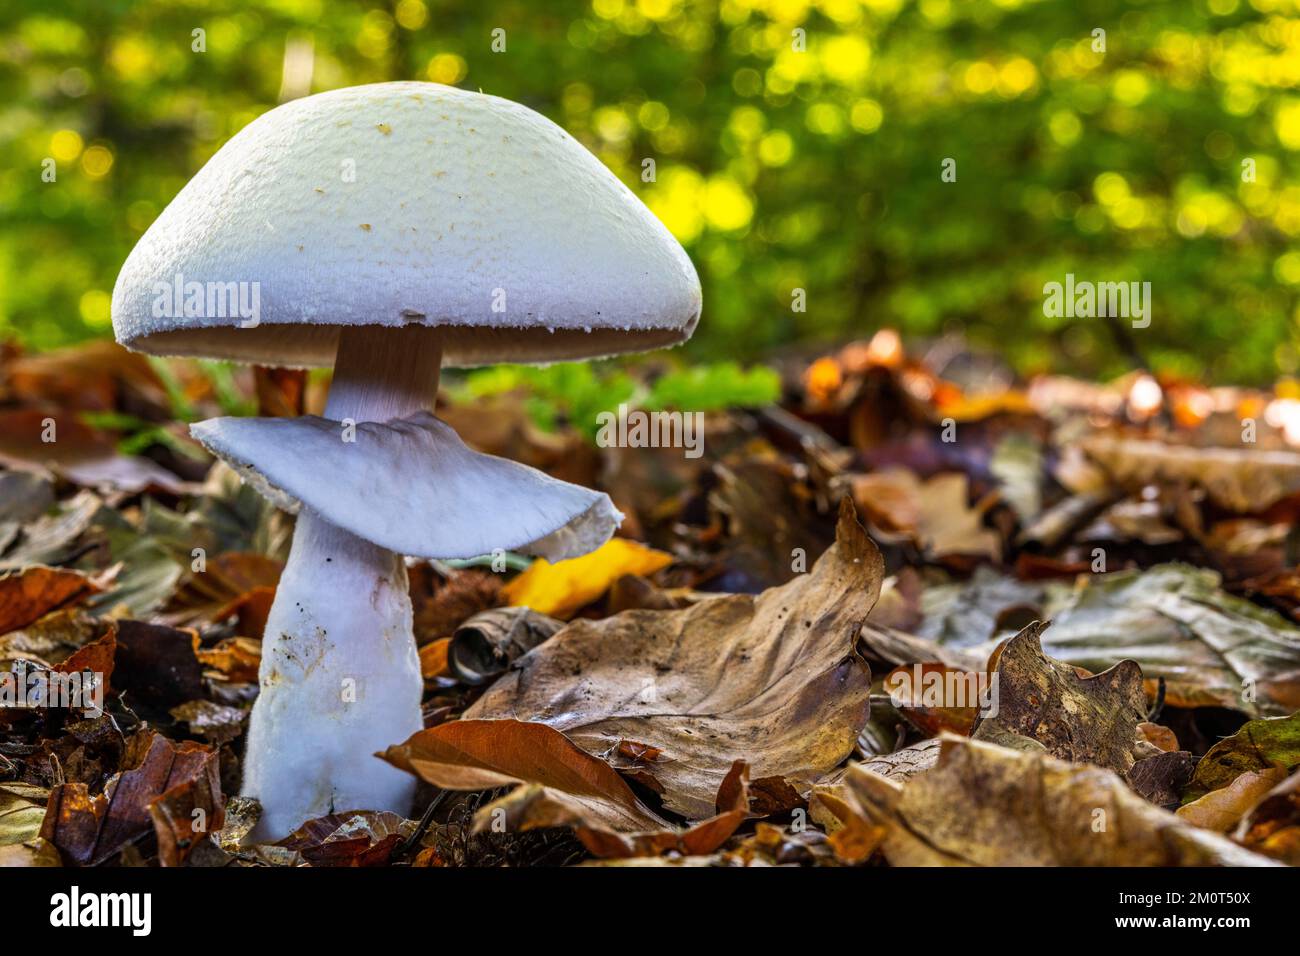 France, Somme (80), Cr?cy-en-Ponthieu, For?t de Cr?cy, Woodland mushrooms in autumn in the forest, Agaricus silvicola Stock Photo